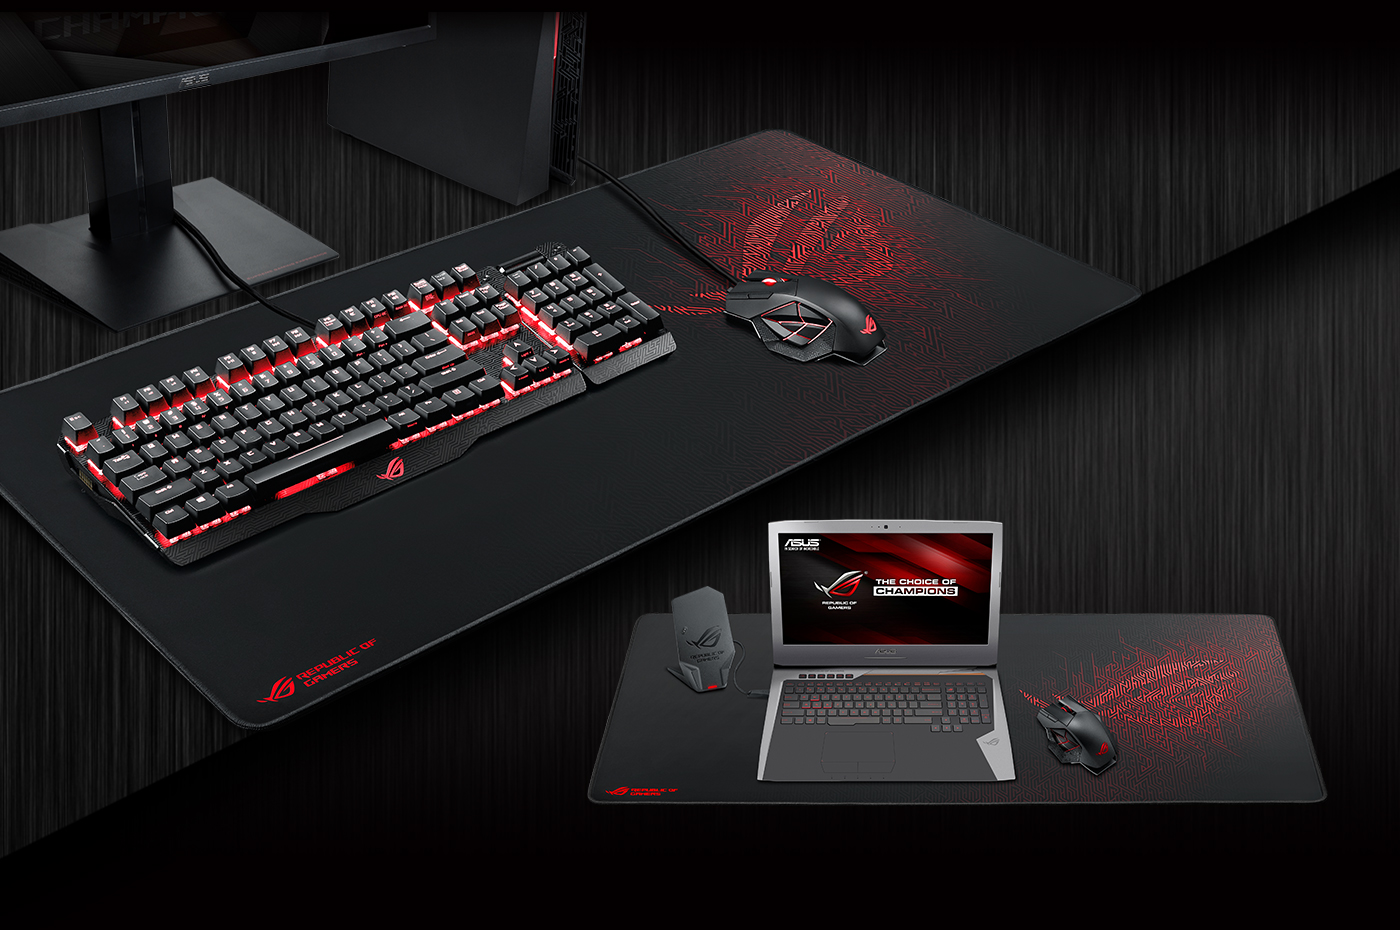 The ROG Sheath is large enough to accommodate a keyboard and mouse and The ROG Sheath is large enough to accomodadte an ROG laptop, mouse, and ROG Phone stand